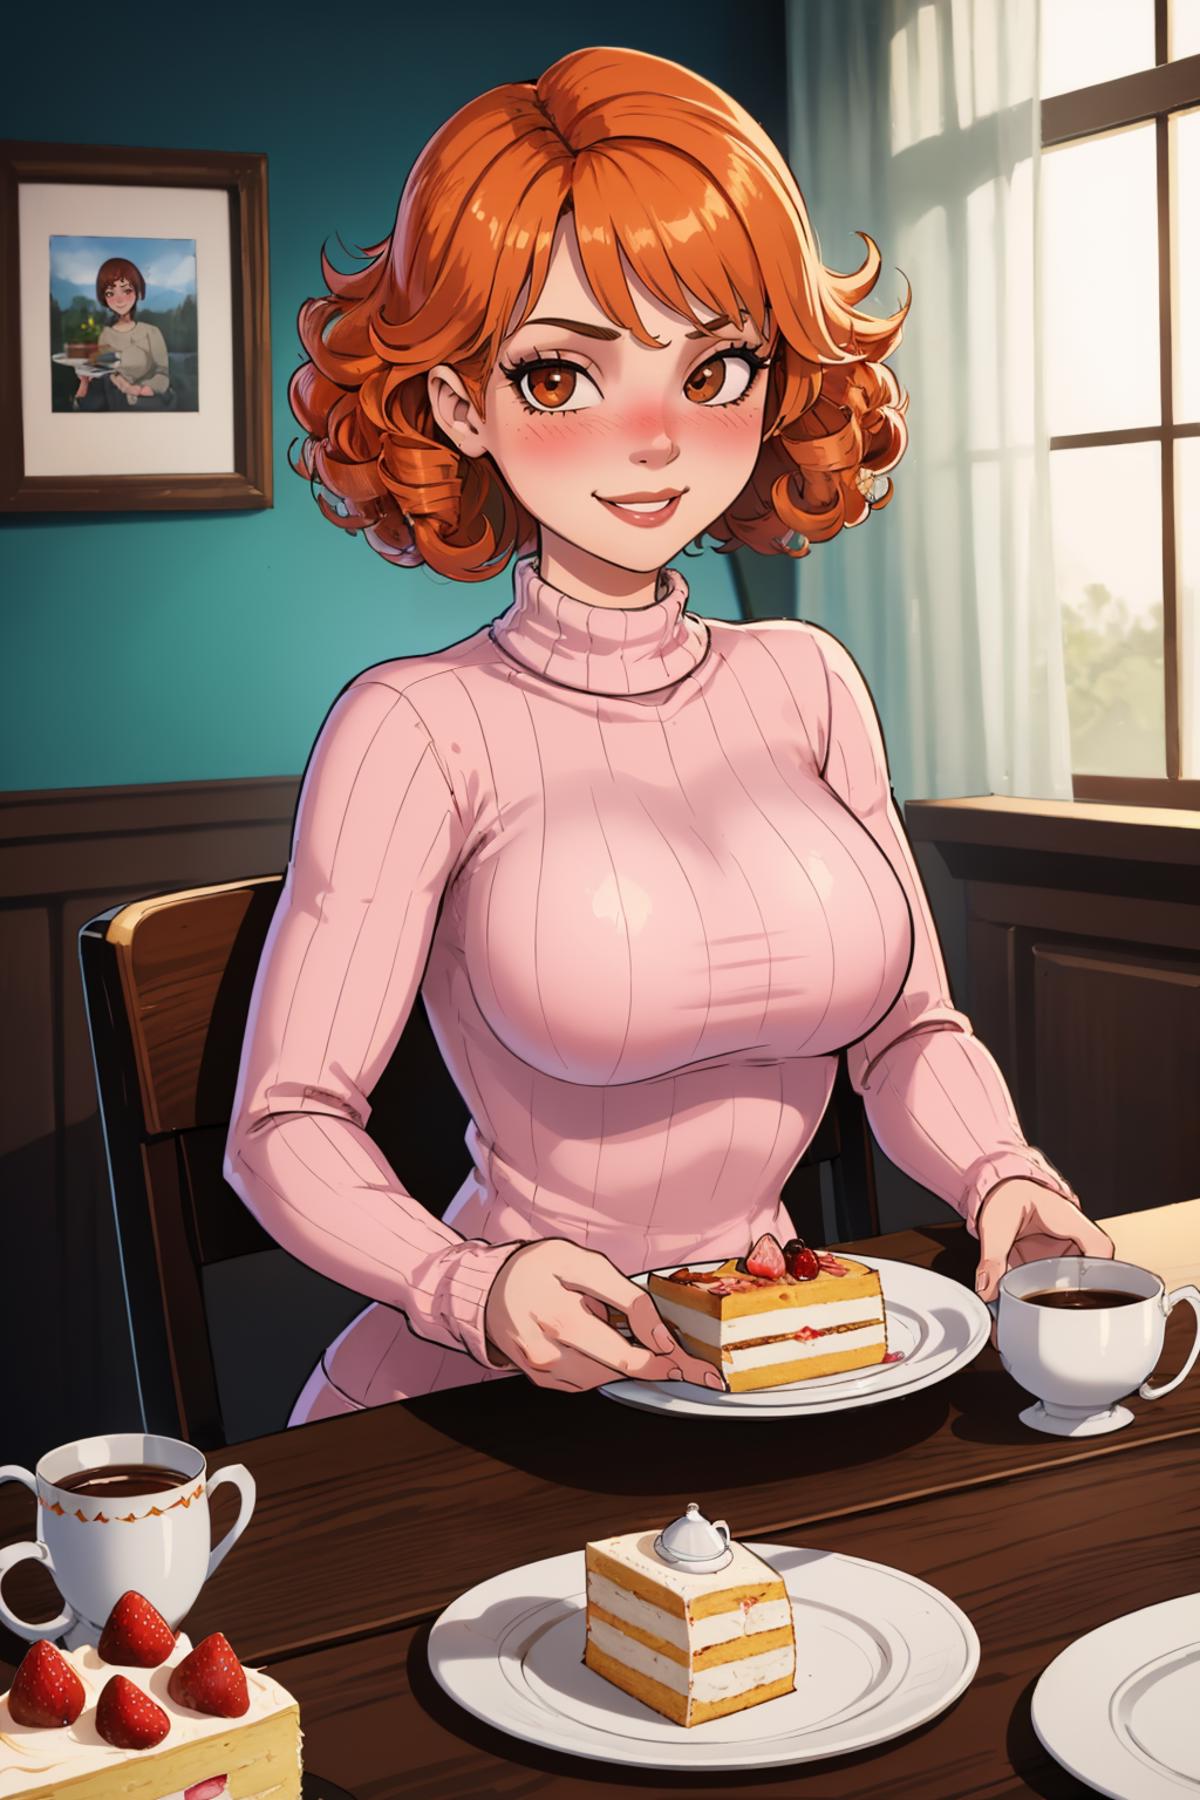 A cartoon illustration of a woman sitting at a table with a slice of cake and a cup of coffee.